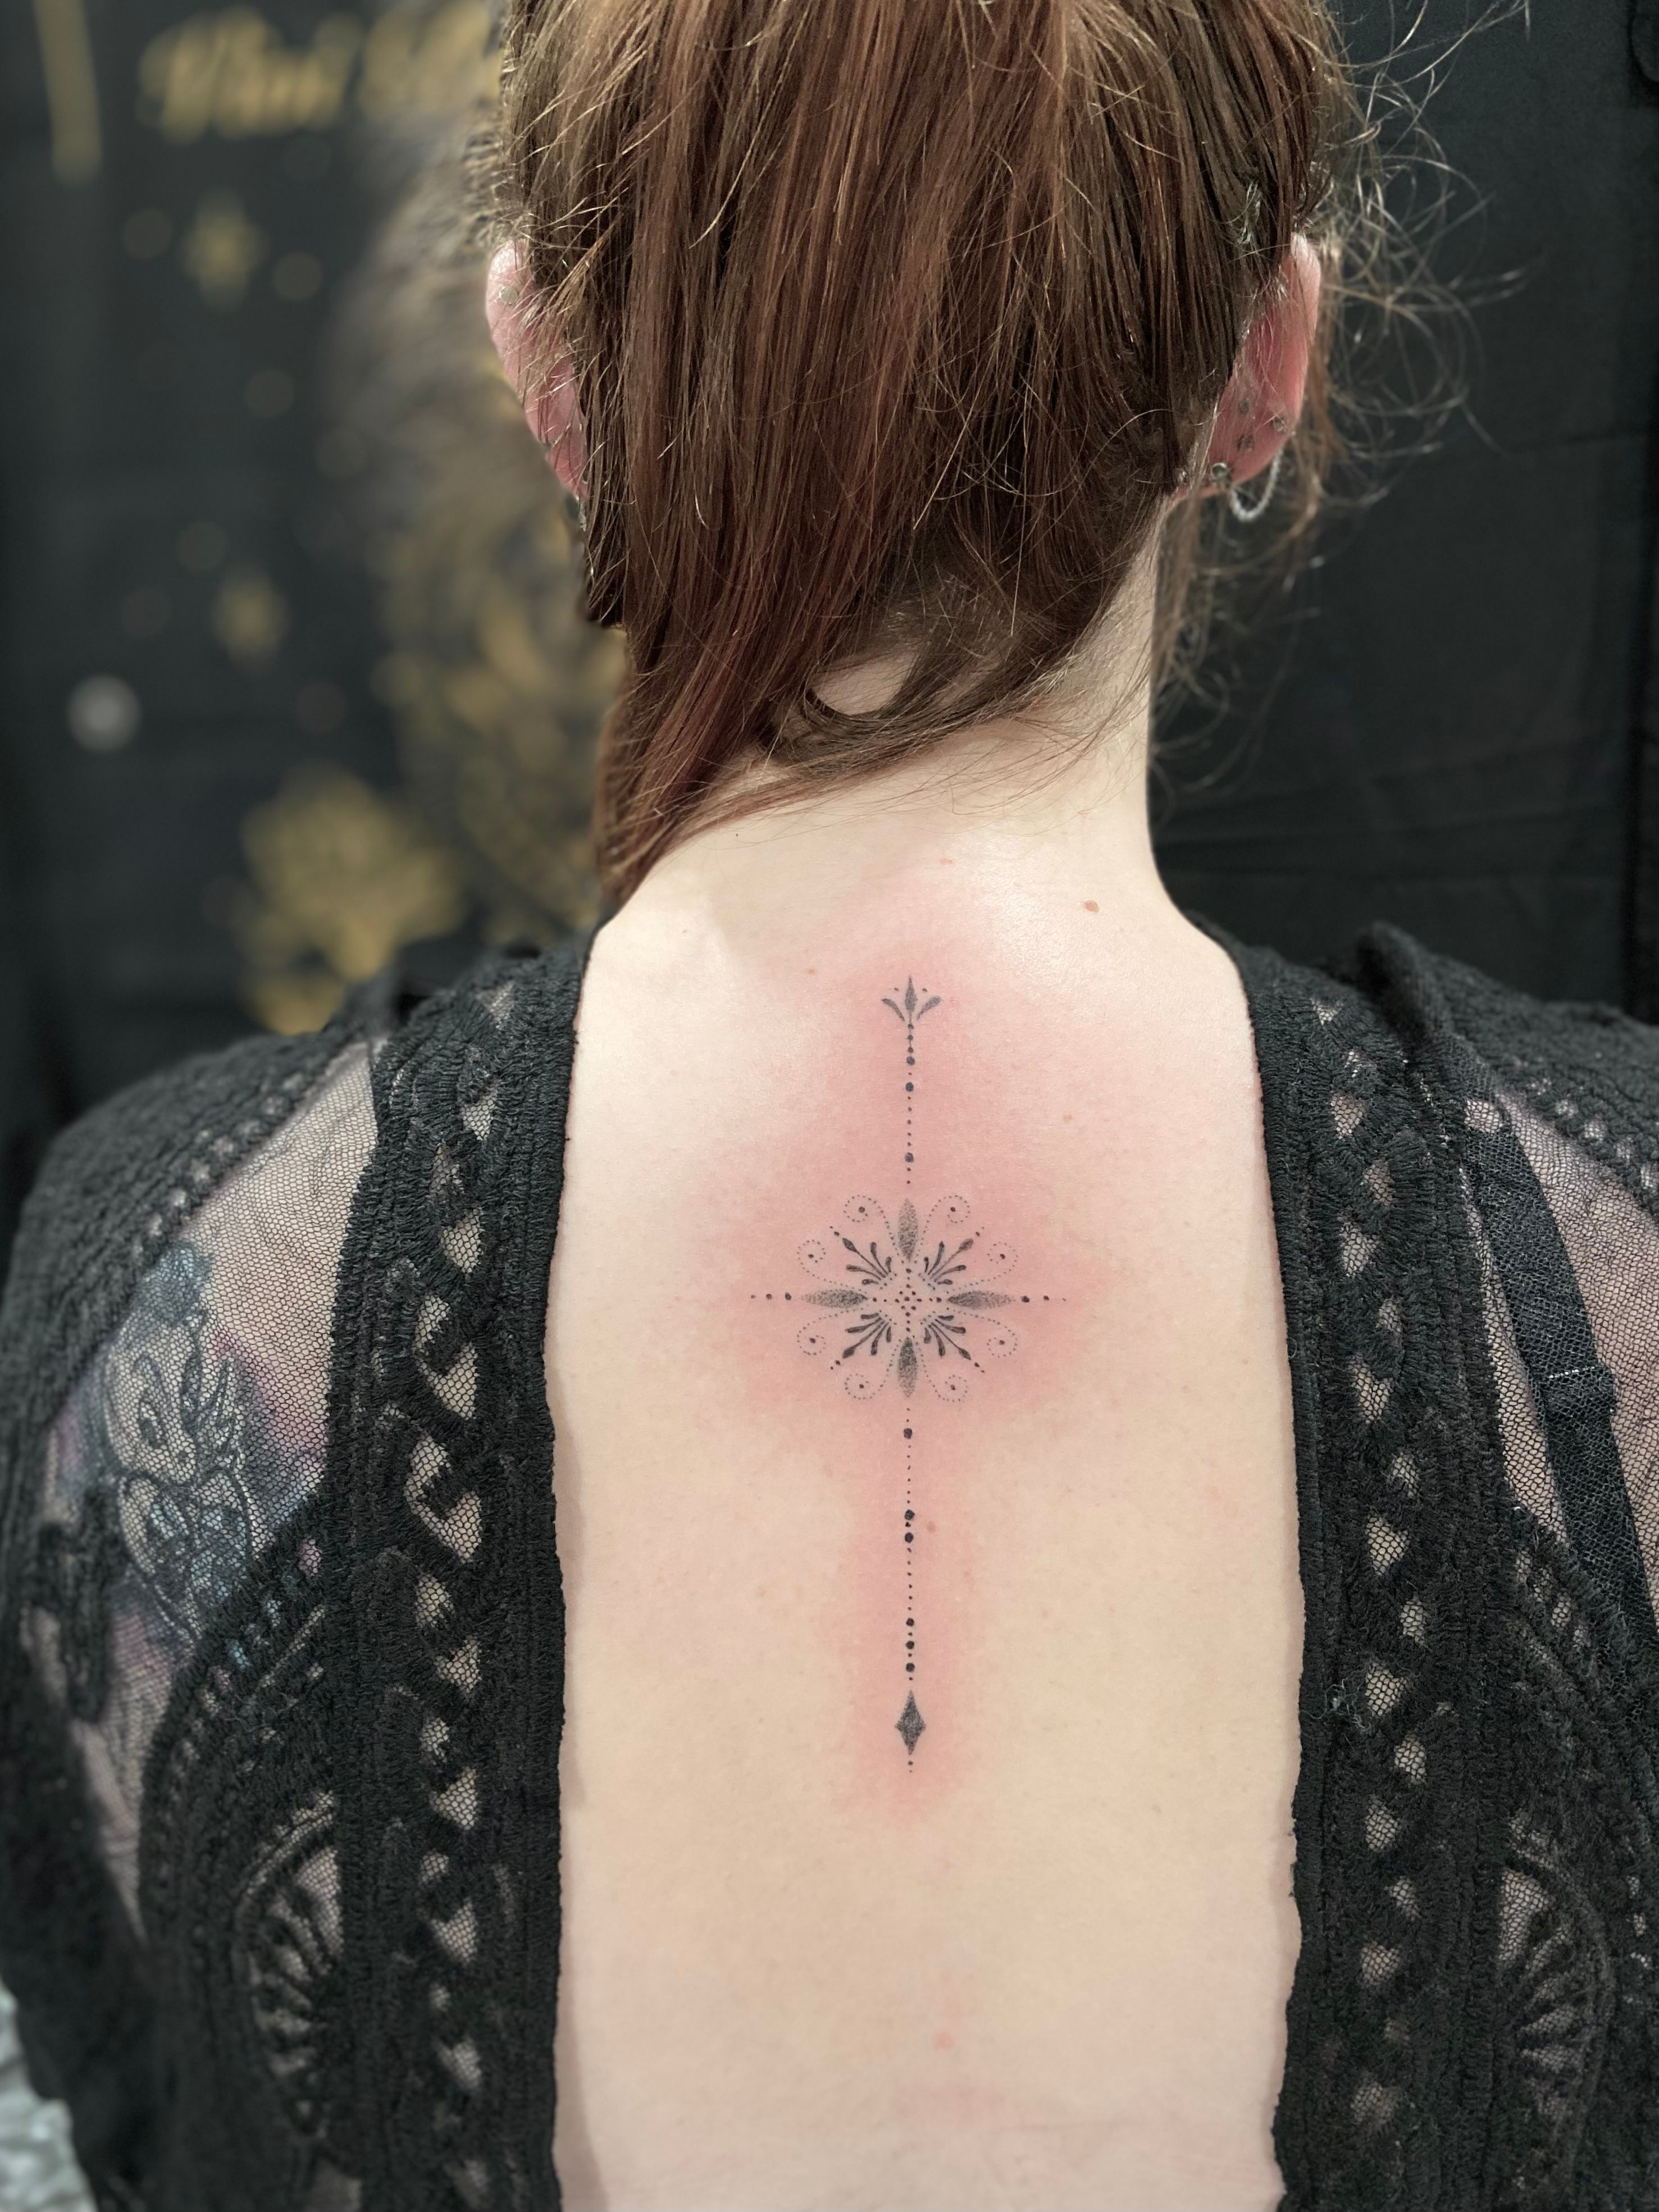 Buy Delicate Star Cross Natural Temporary Tattoo 2-week Tattoo  Semi-permanent Tattoos Online in India - Etsy